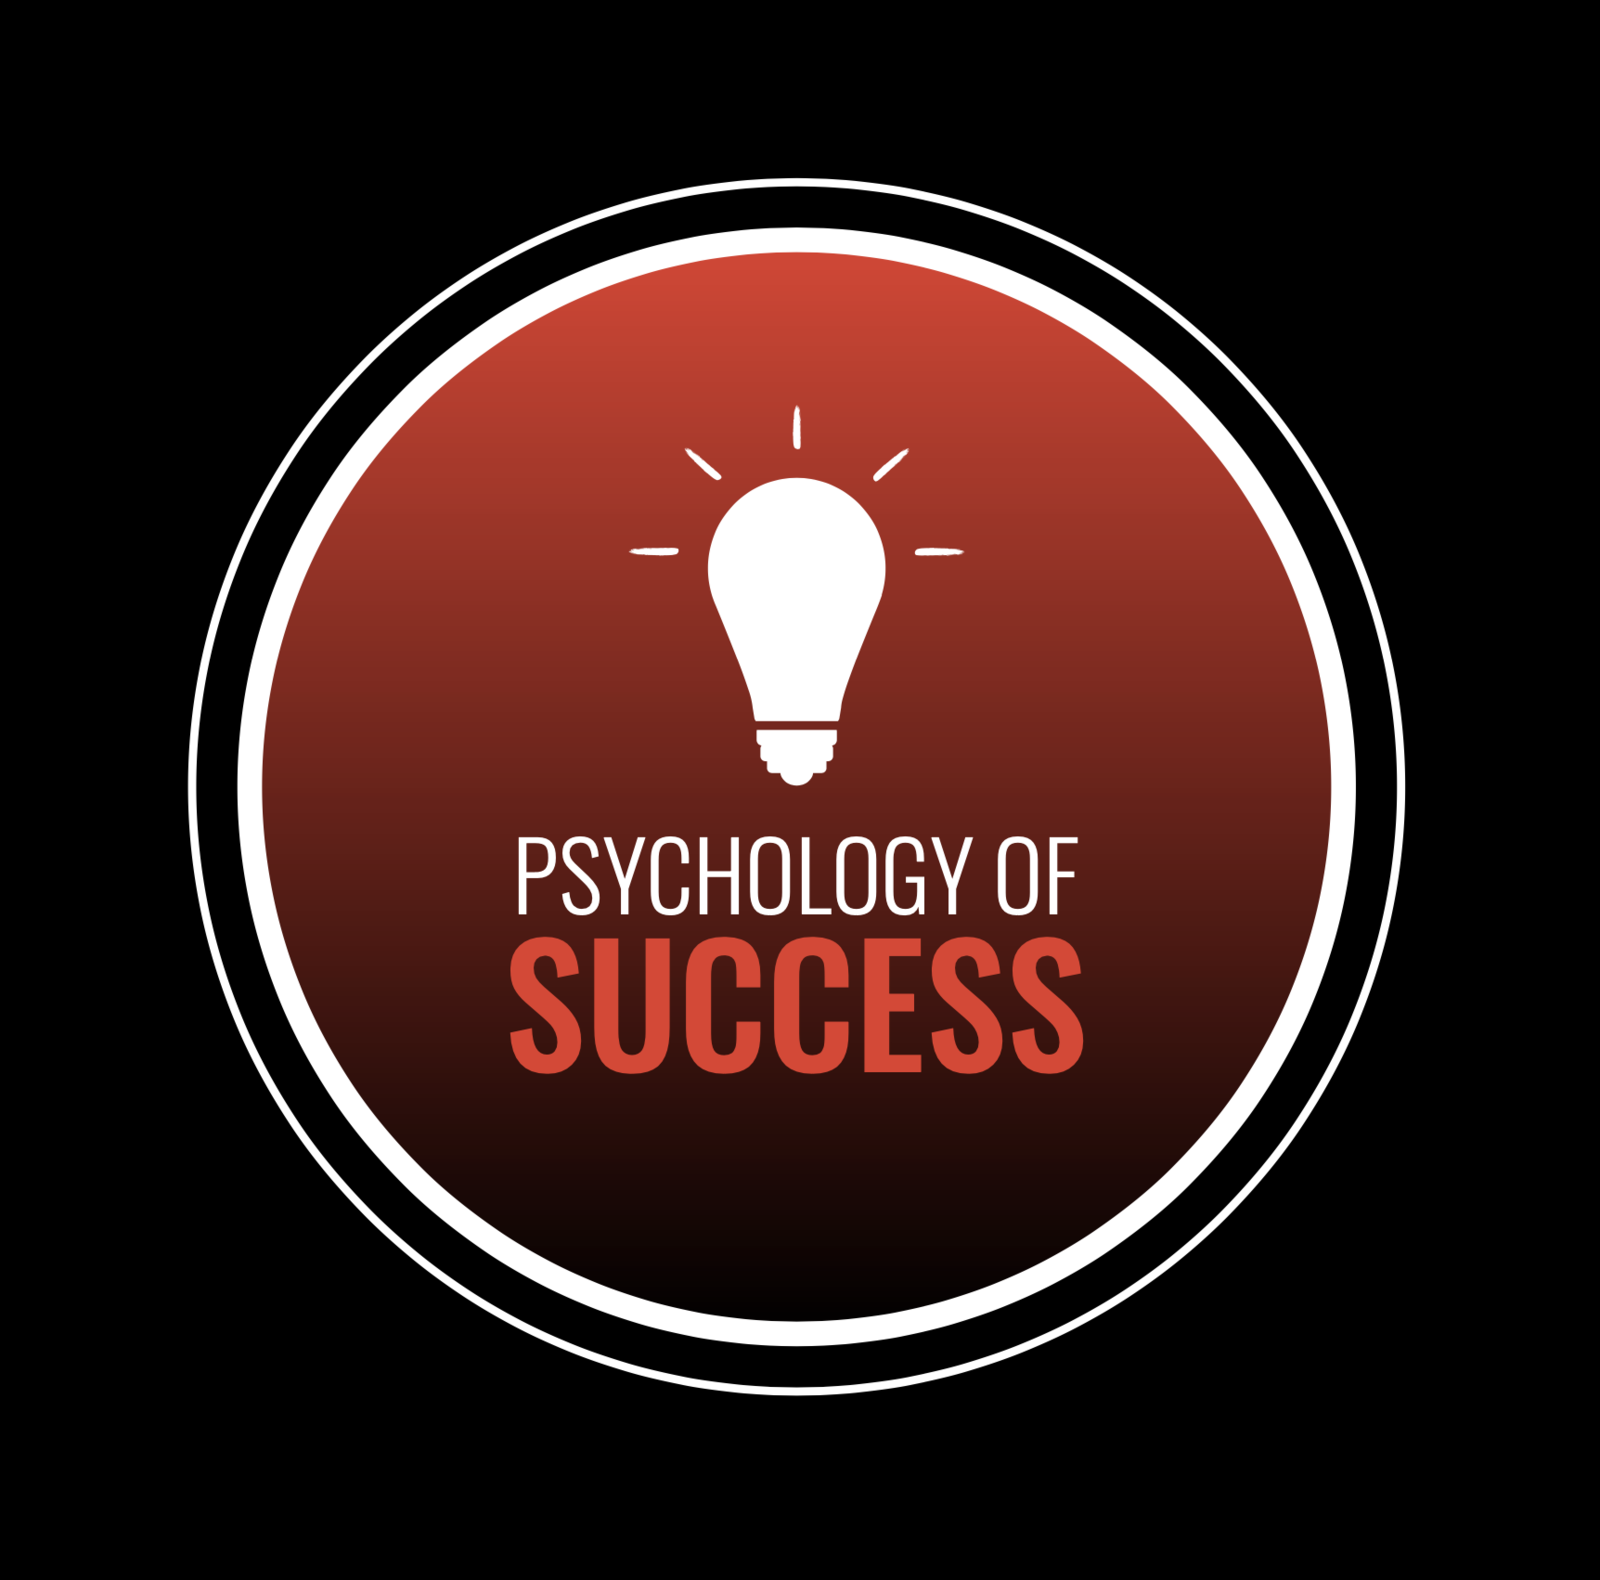 1: Join Paul McVeigh for 'The Psychology of Success'!